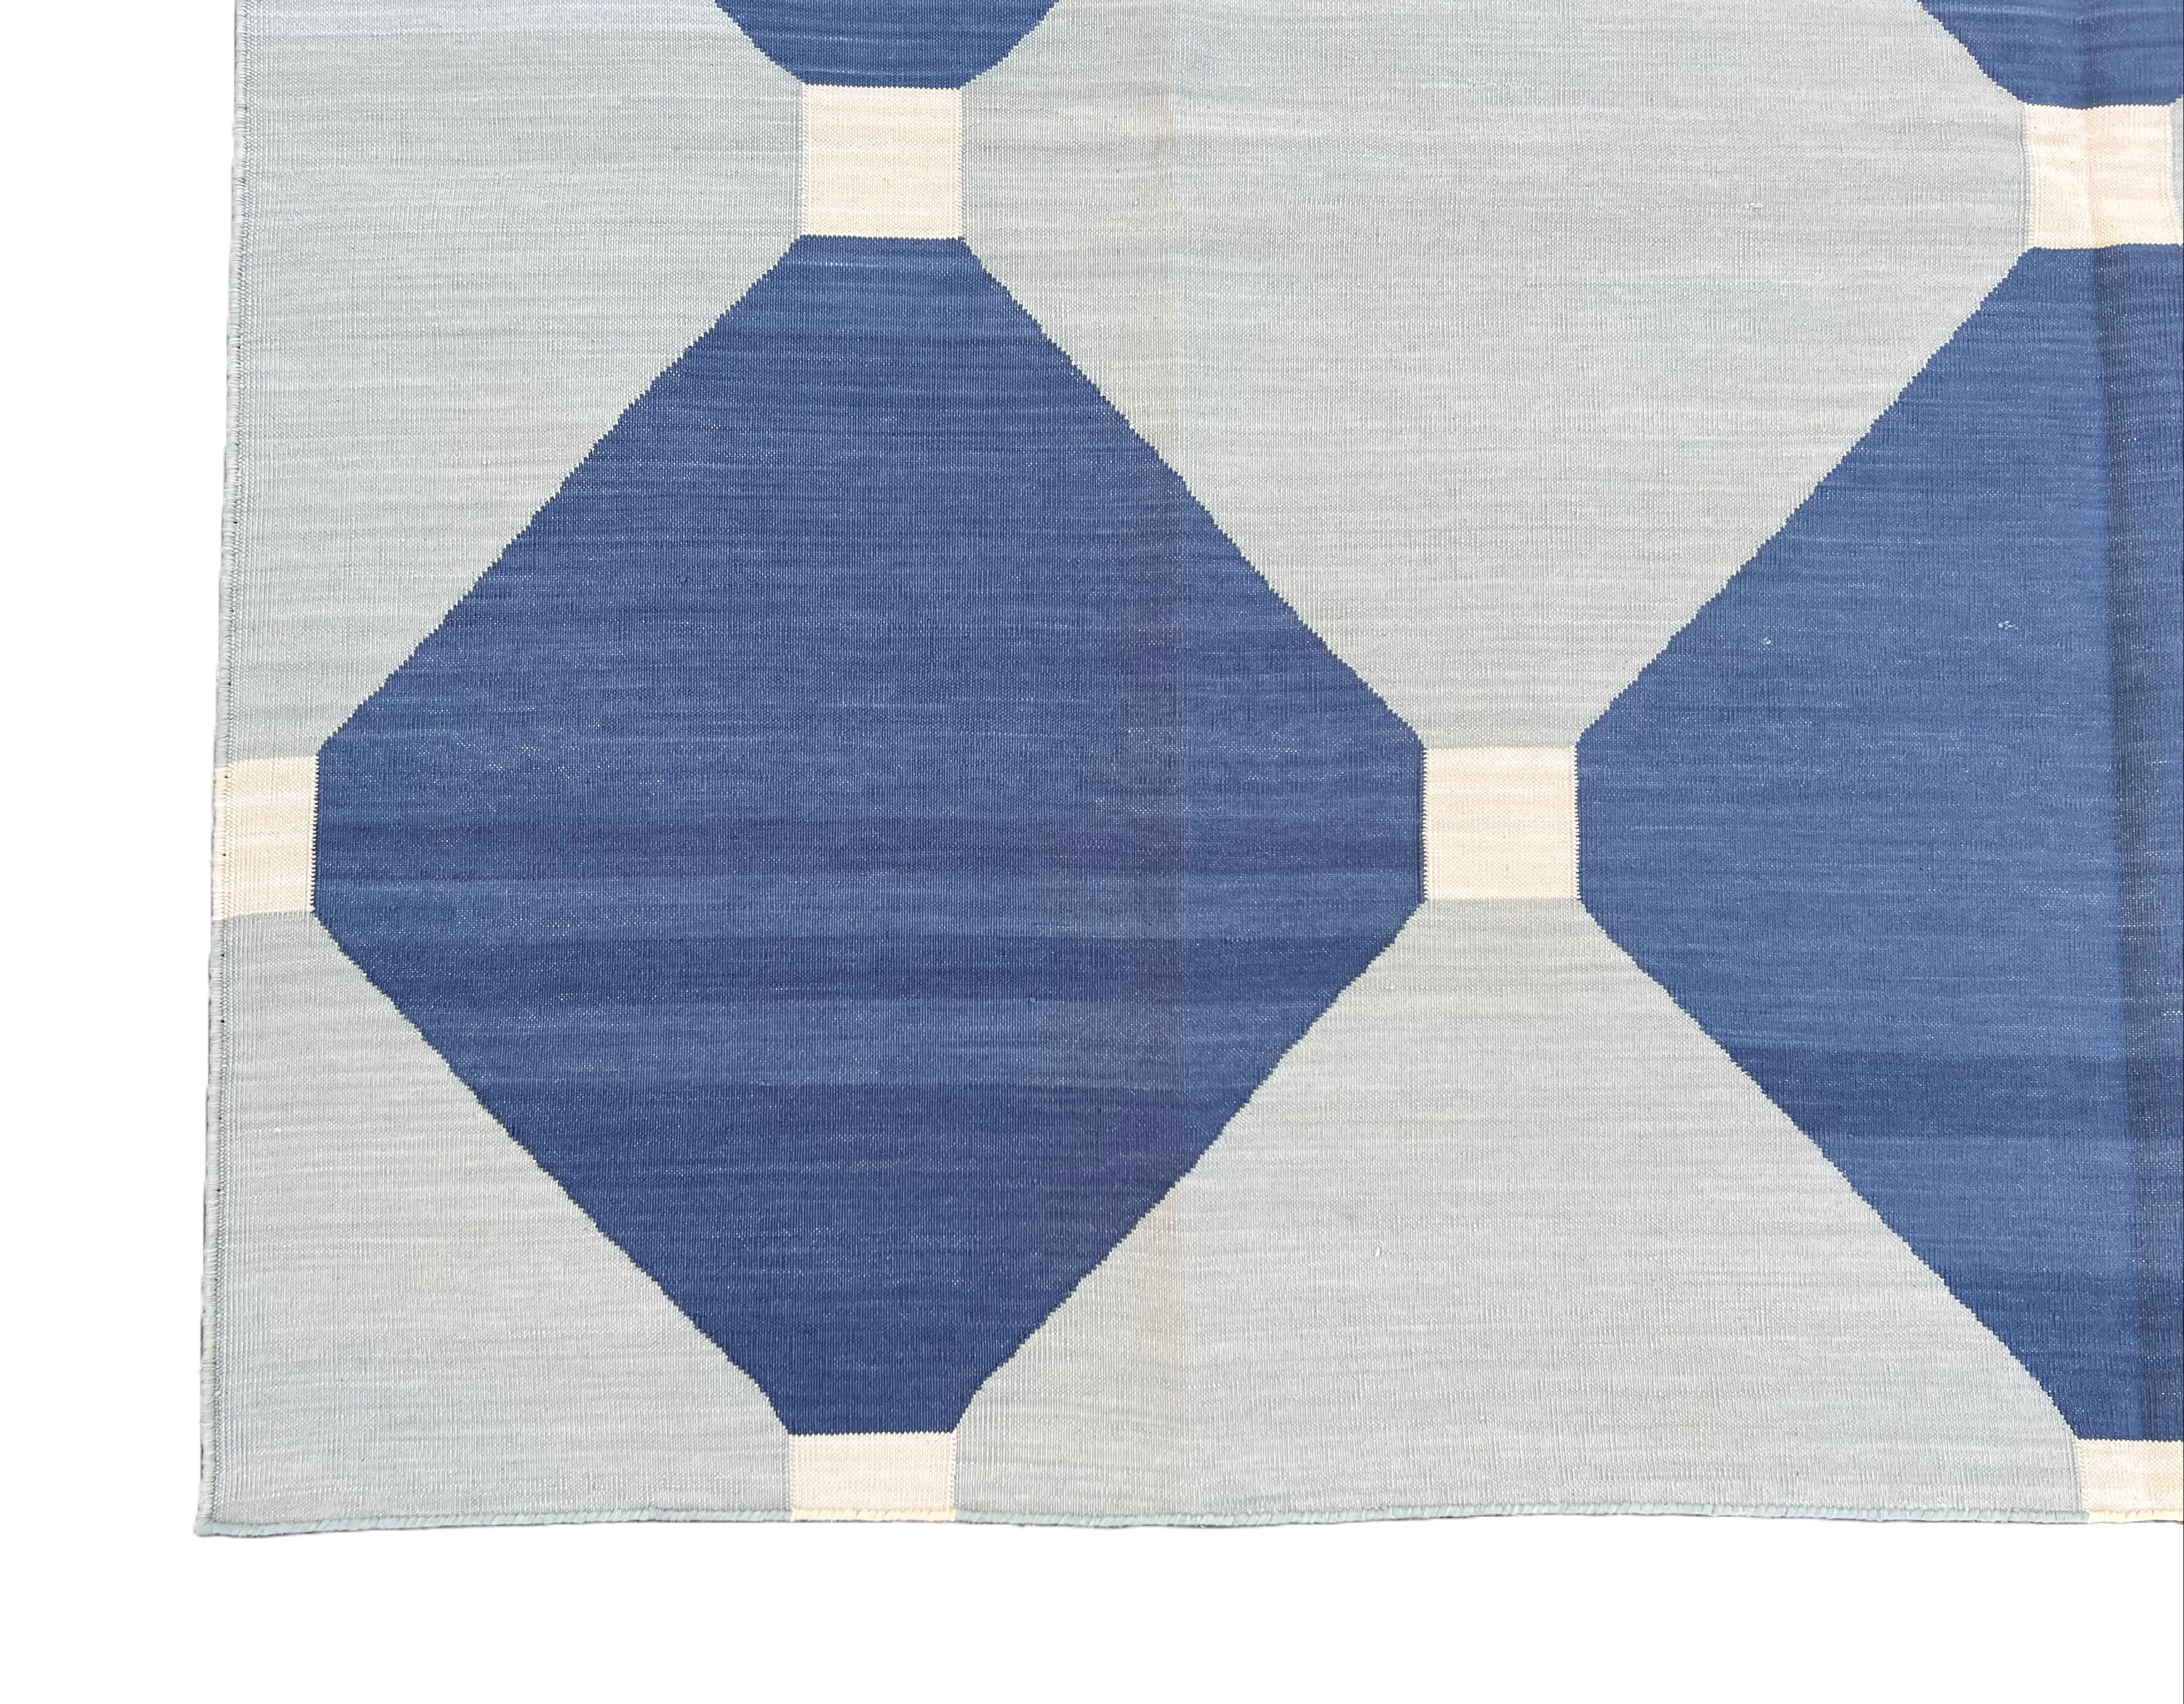 Handmade Cotton Area Flat Weave Rug, 6x9 Grey And Blue Tile Patterned Dhurrie In New Condition For Sale In Jaipur, IN